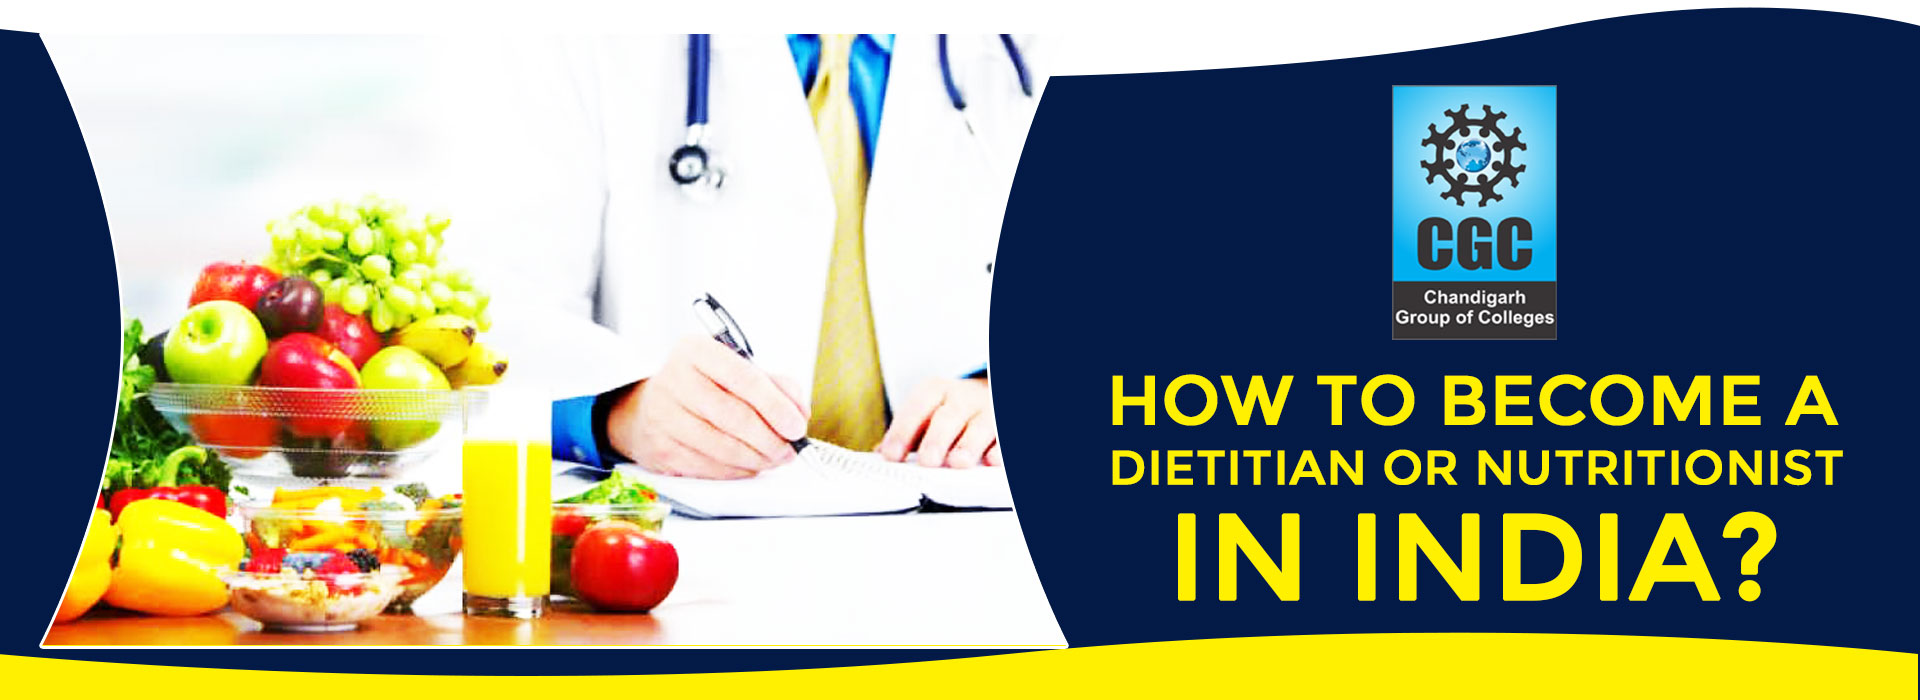 Online jobs for dietitians in india